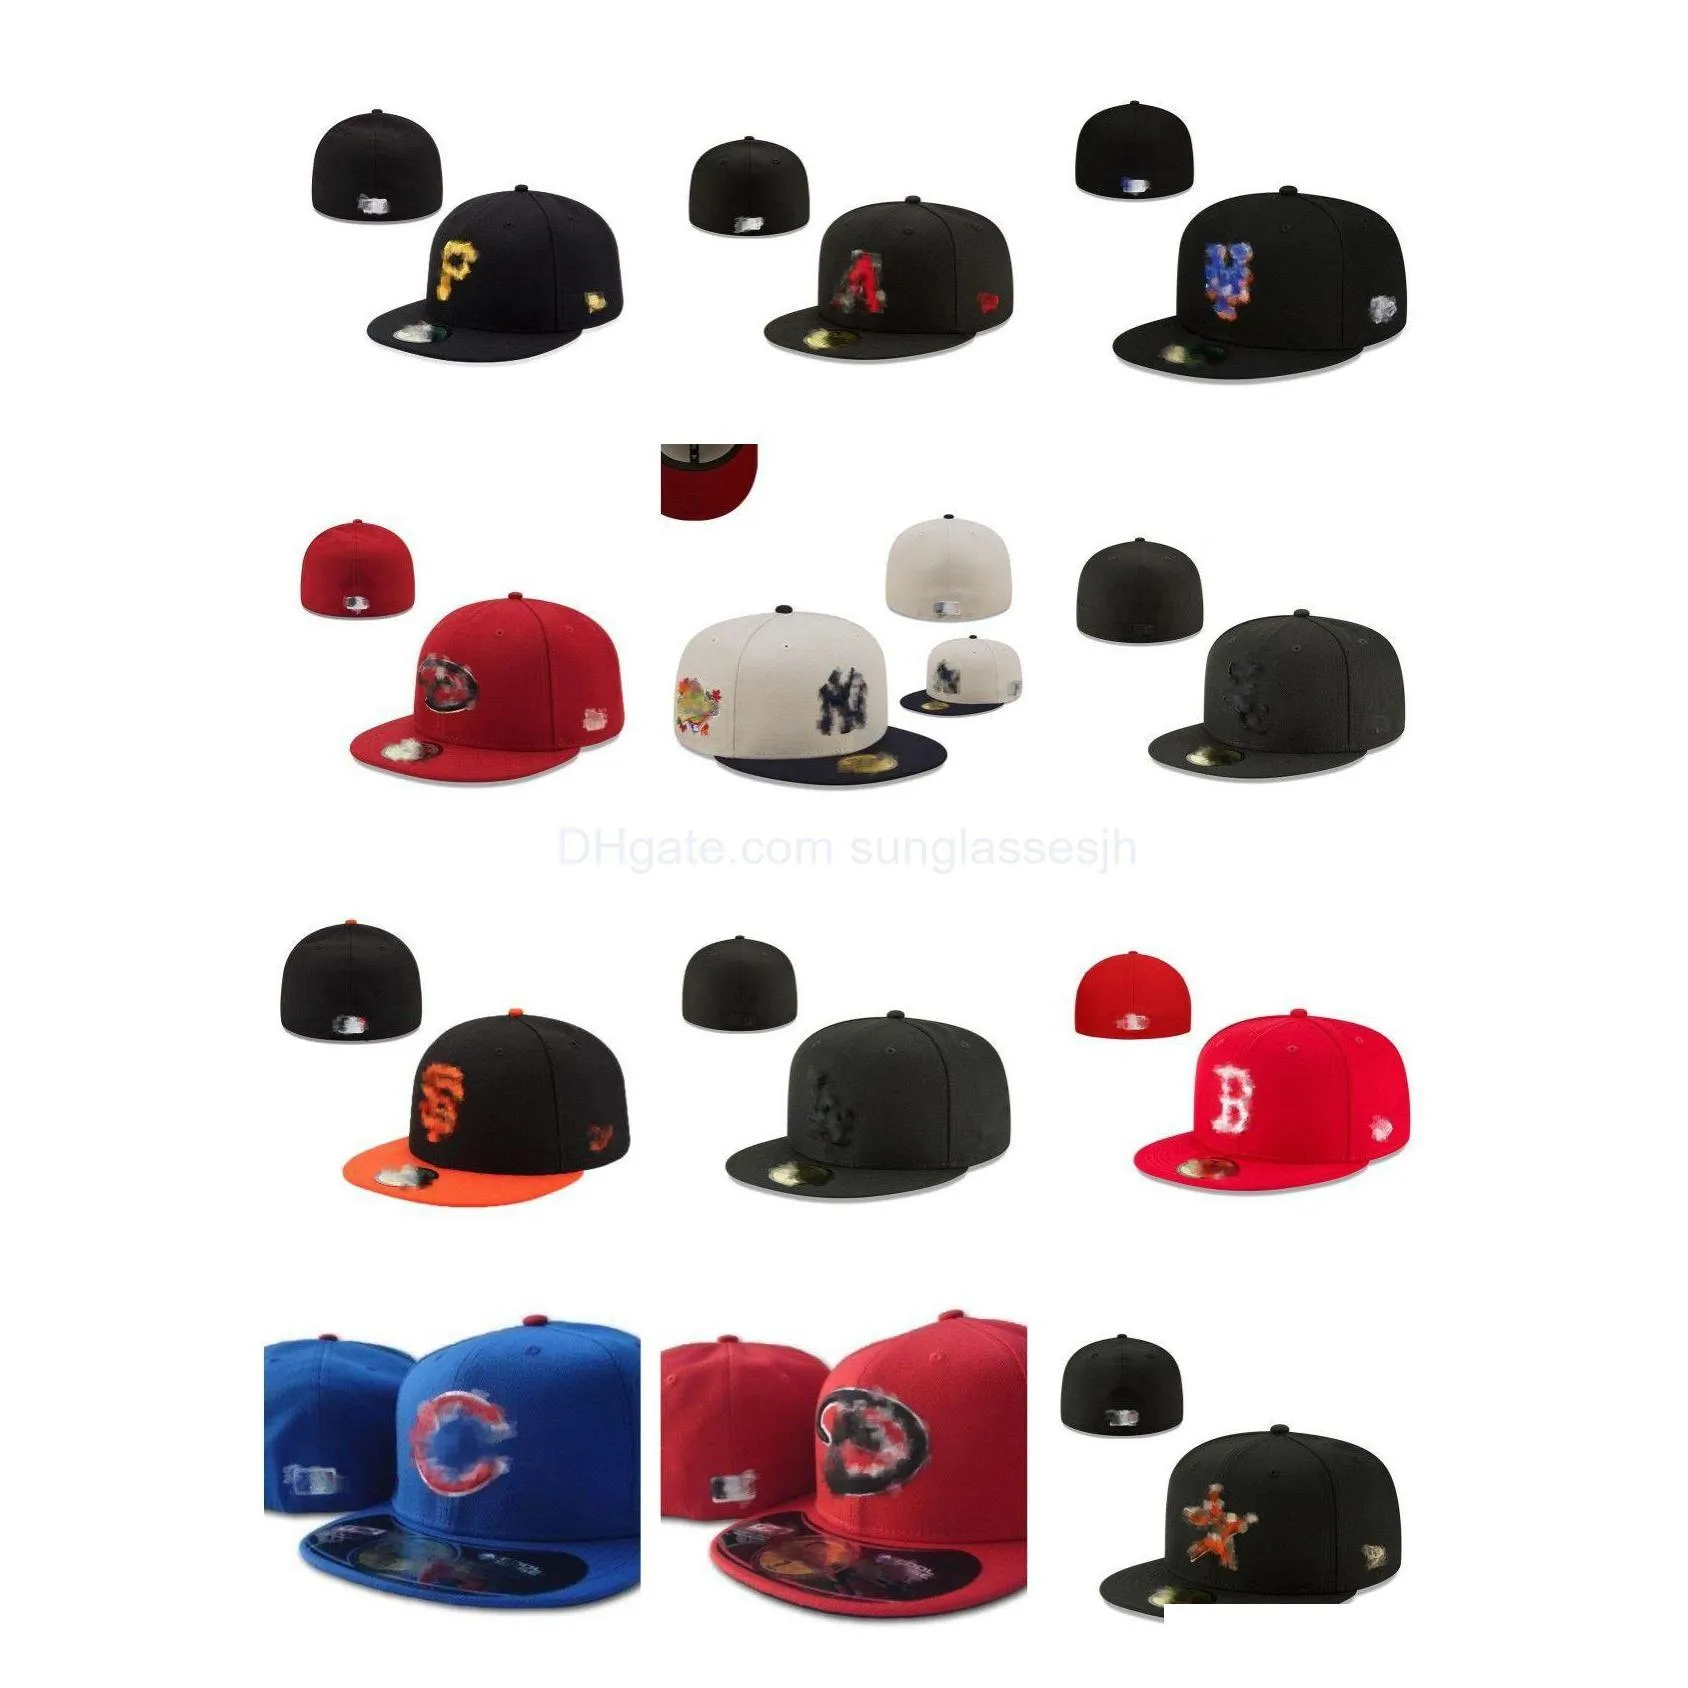 Boll Caps Mix Order Designer Unisex Fitted Hats Snapbacks Hat Justerbar Baskboll Fotboll Broderi All Team Logo Cotton Letters S Dhnzy